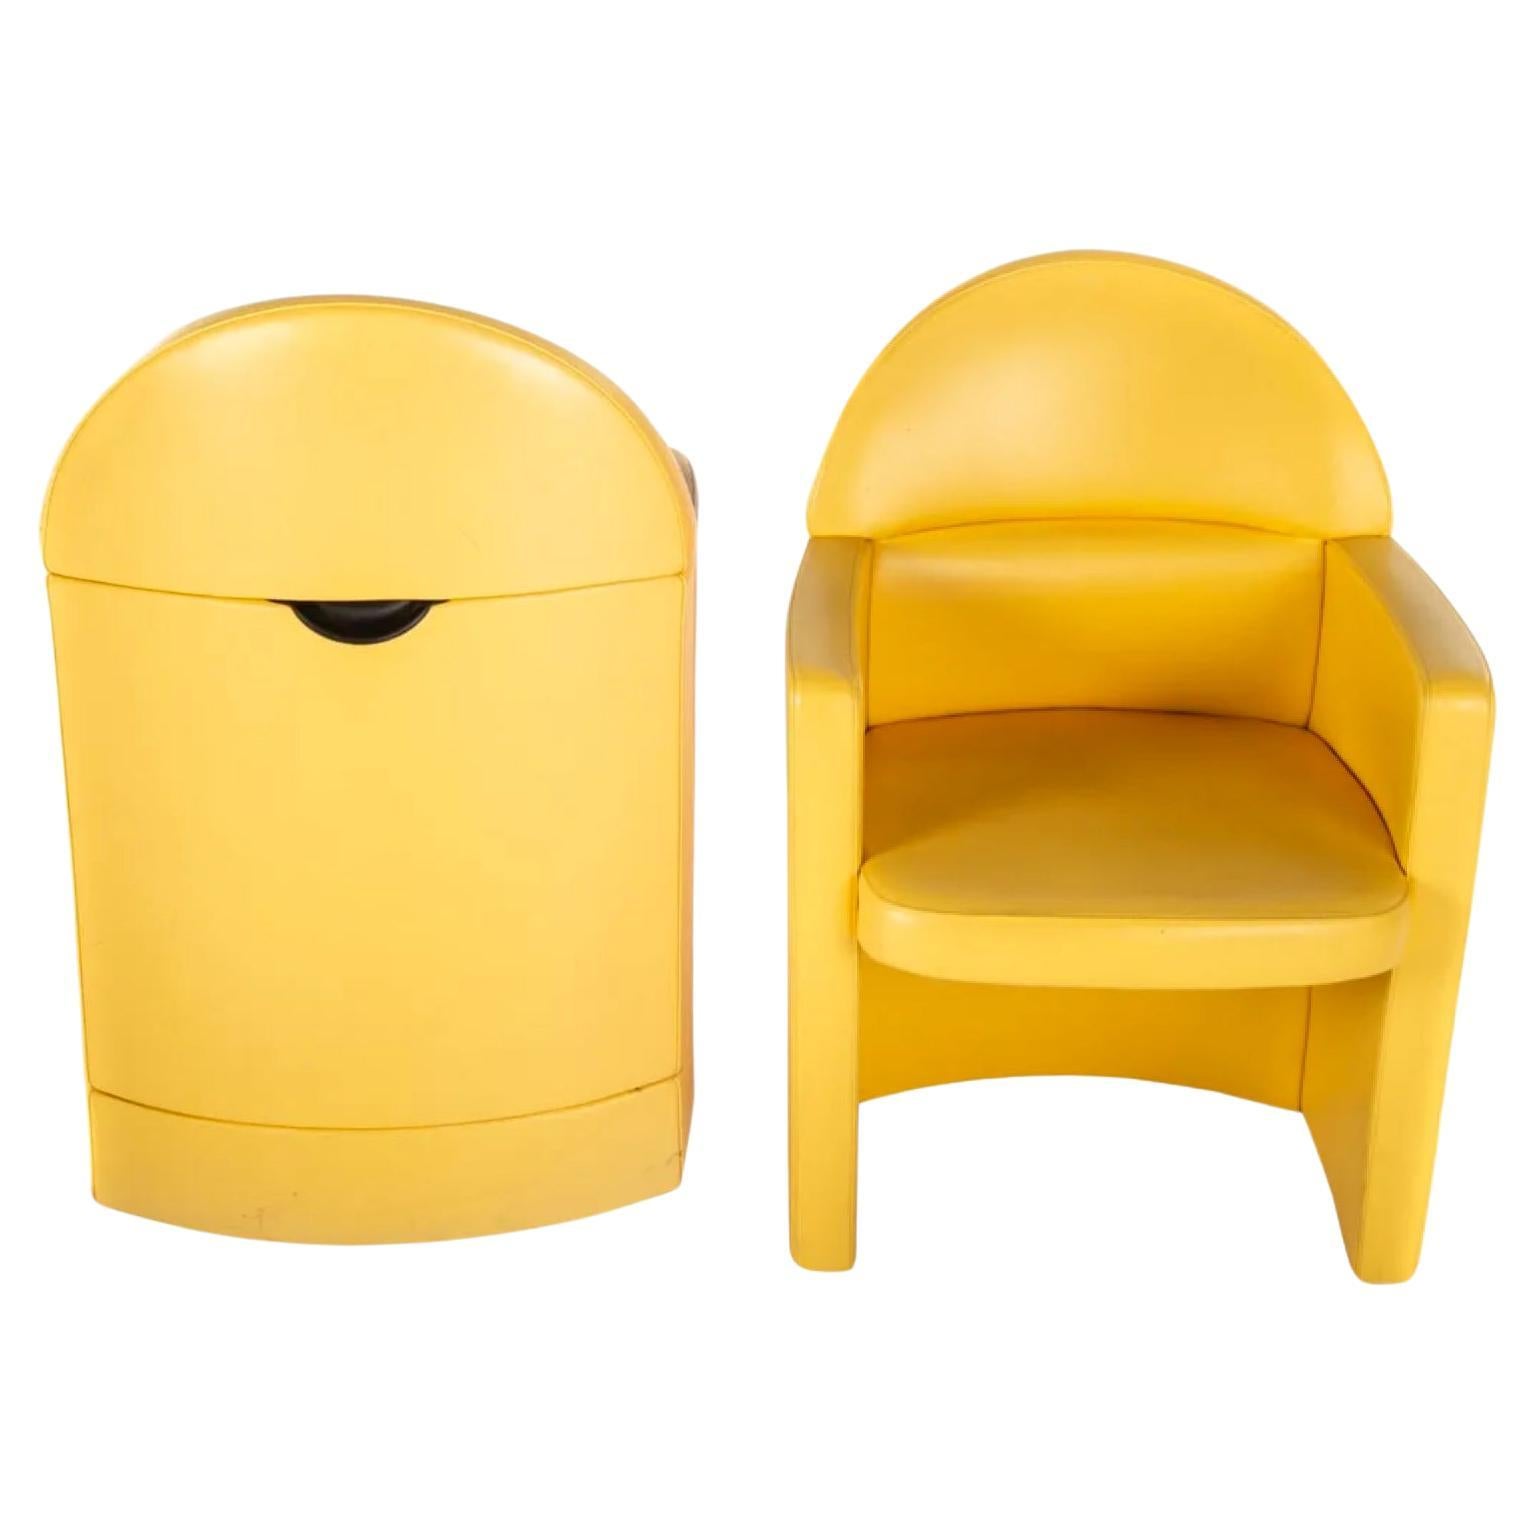 Pair of Bright Yellow Leather EGO Meeting chairs Designed by Paolo Pininfarina for Poltrona Frau. The Ego Meeting armchair is considered one of the bestsellers of the Poltrona Frau company. It finds its ideal location in the workspace. Its lines are